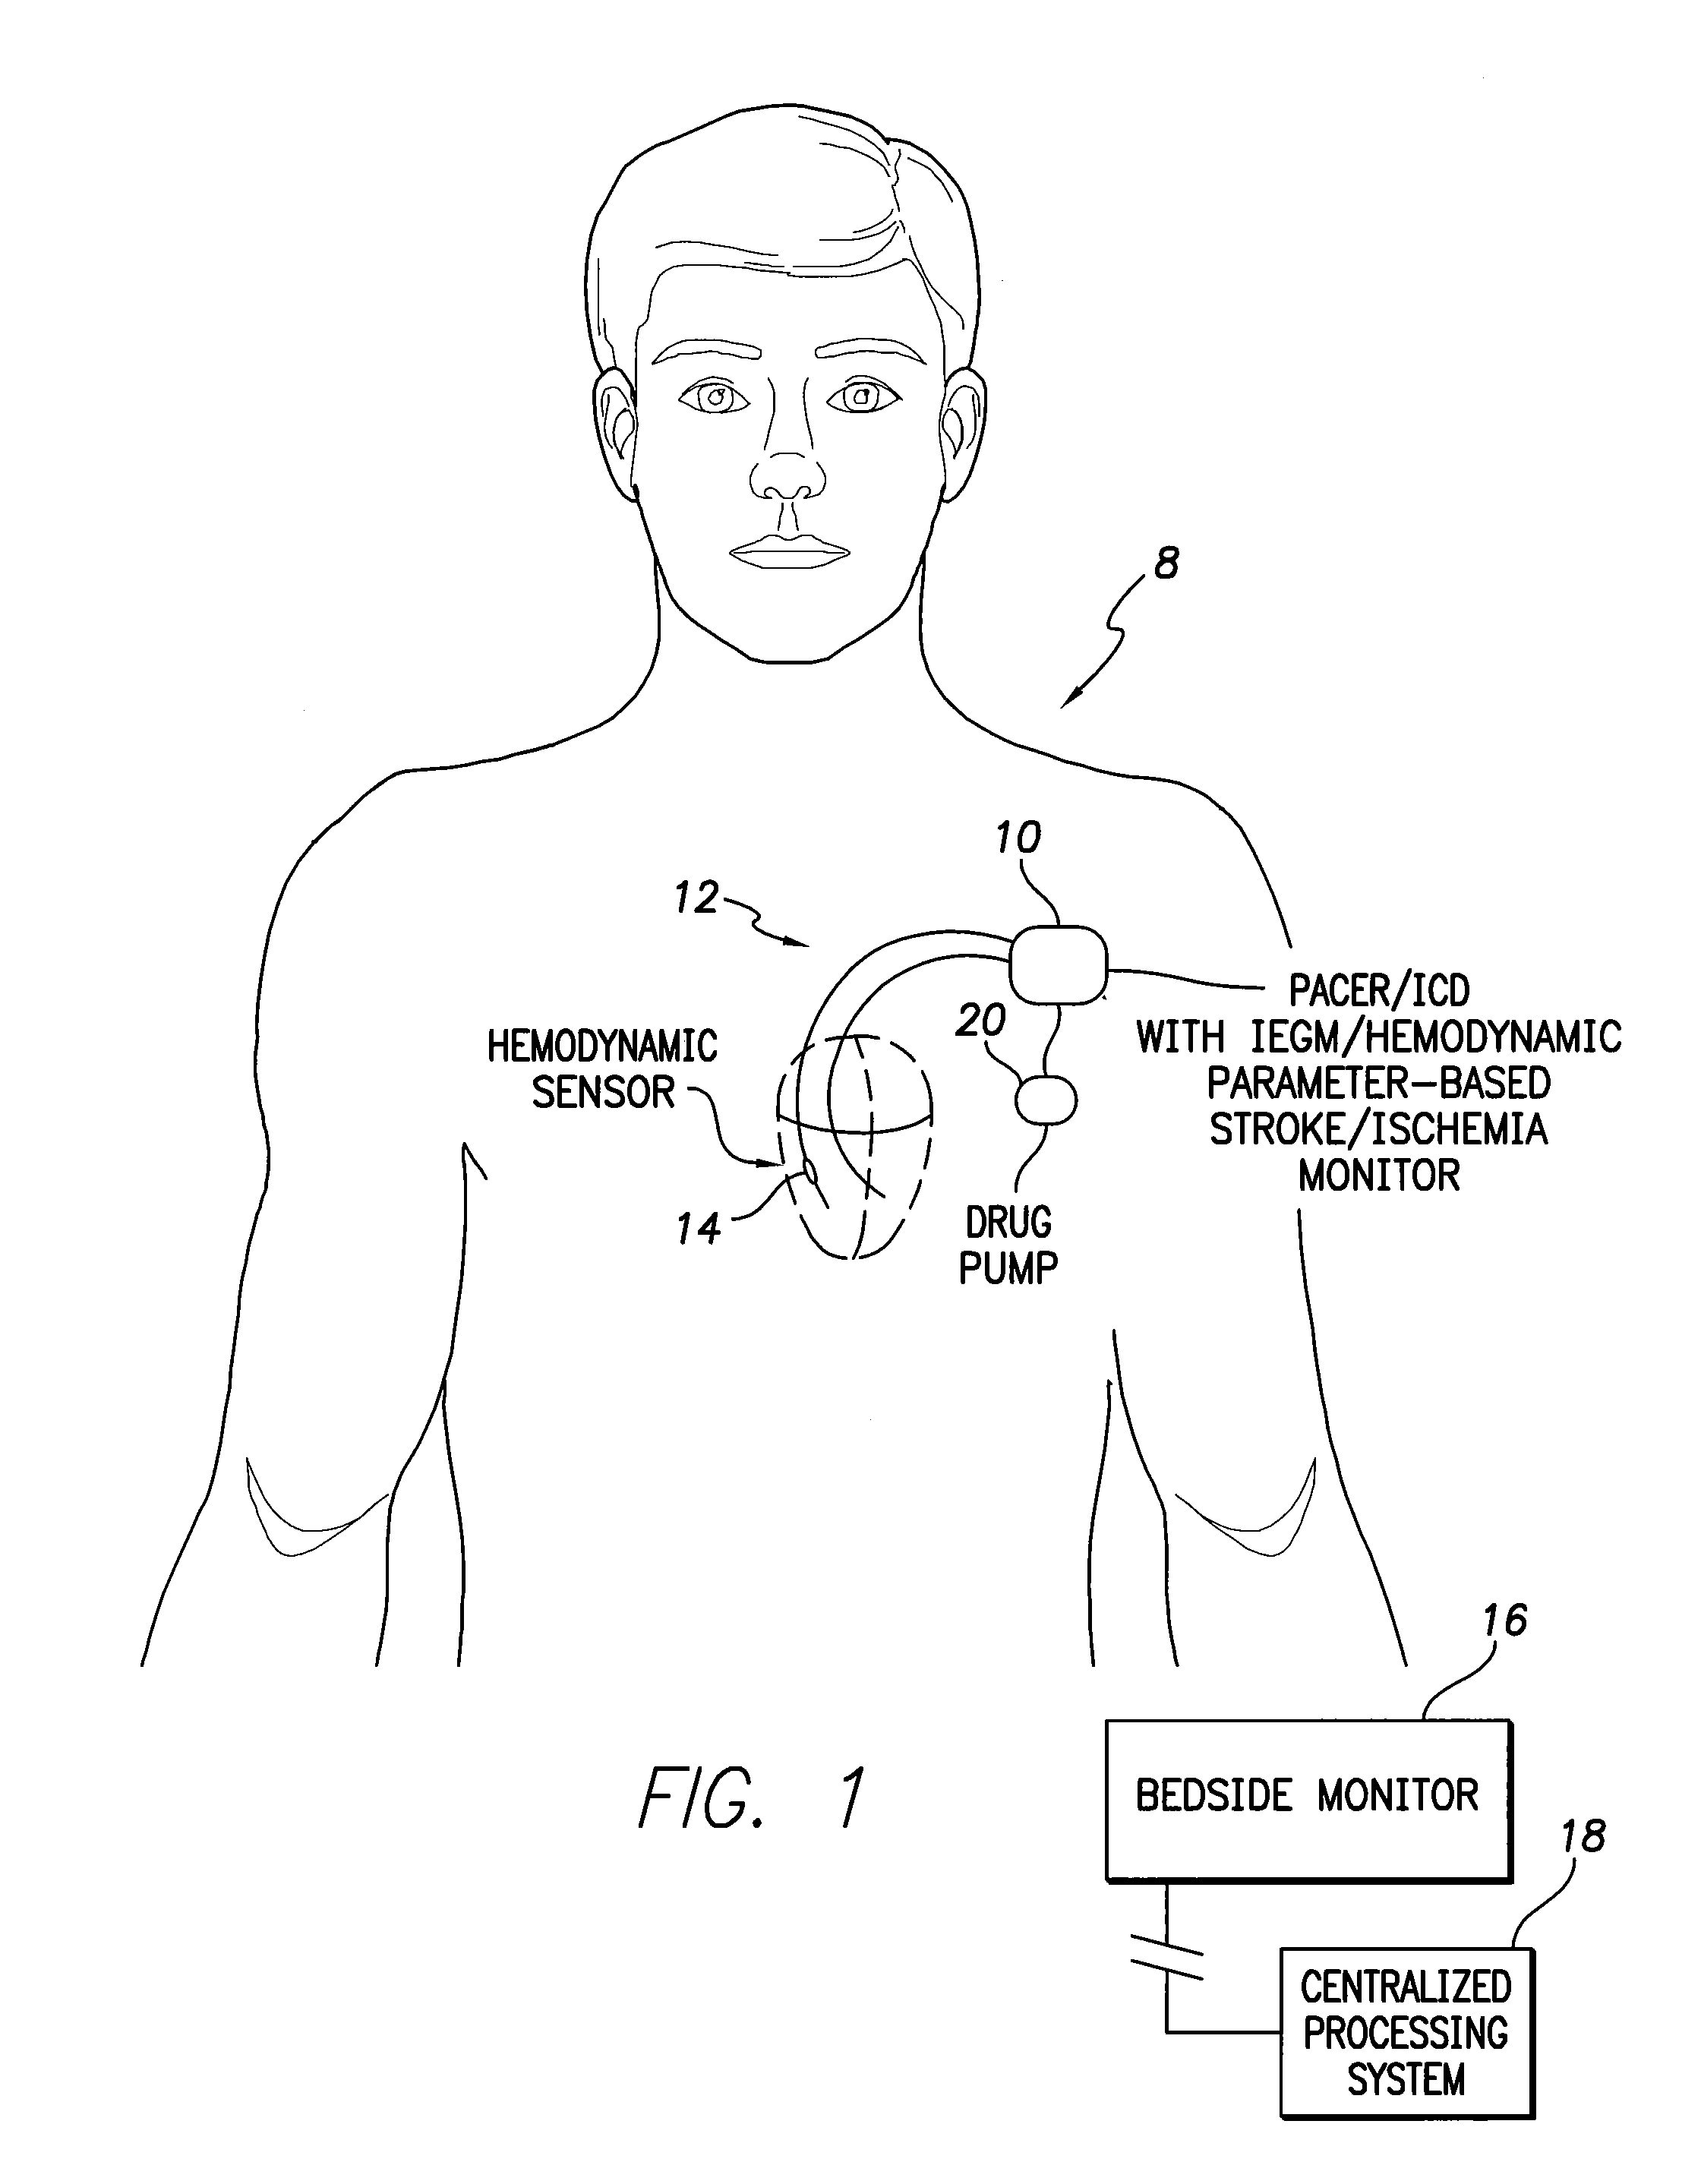 Systems and Methods for Use By an Implantable Medical Device for Detecting and Discriminating Stroke and Cardiac Ischemia Using Electrocardiac Signals and Hemodynamic Parameters